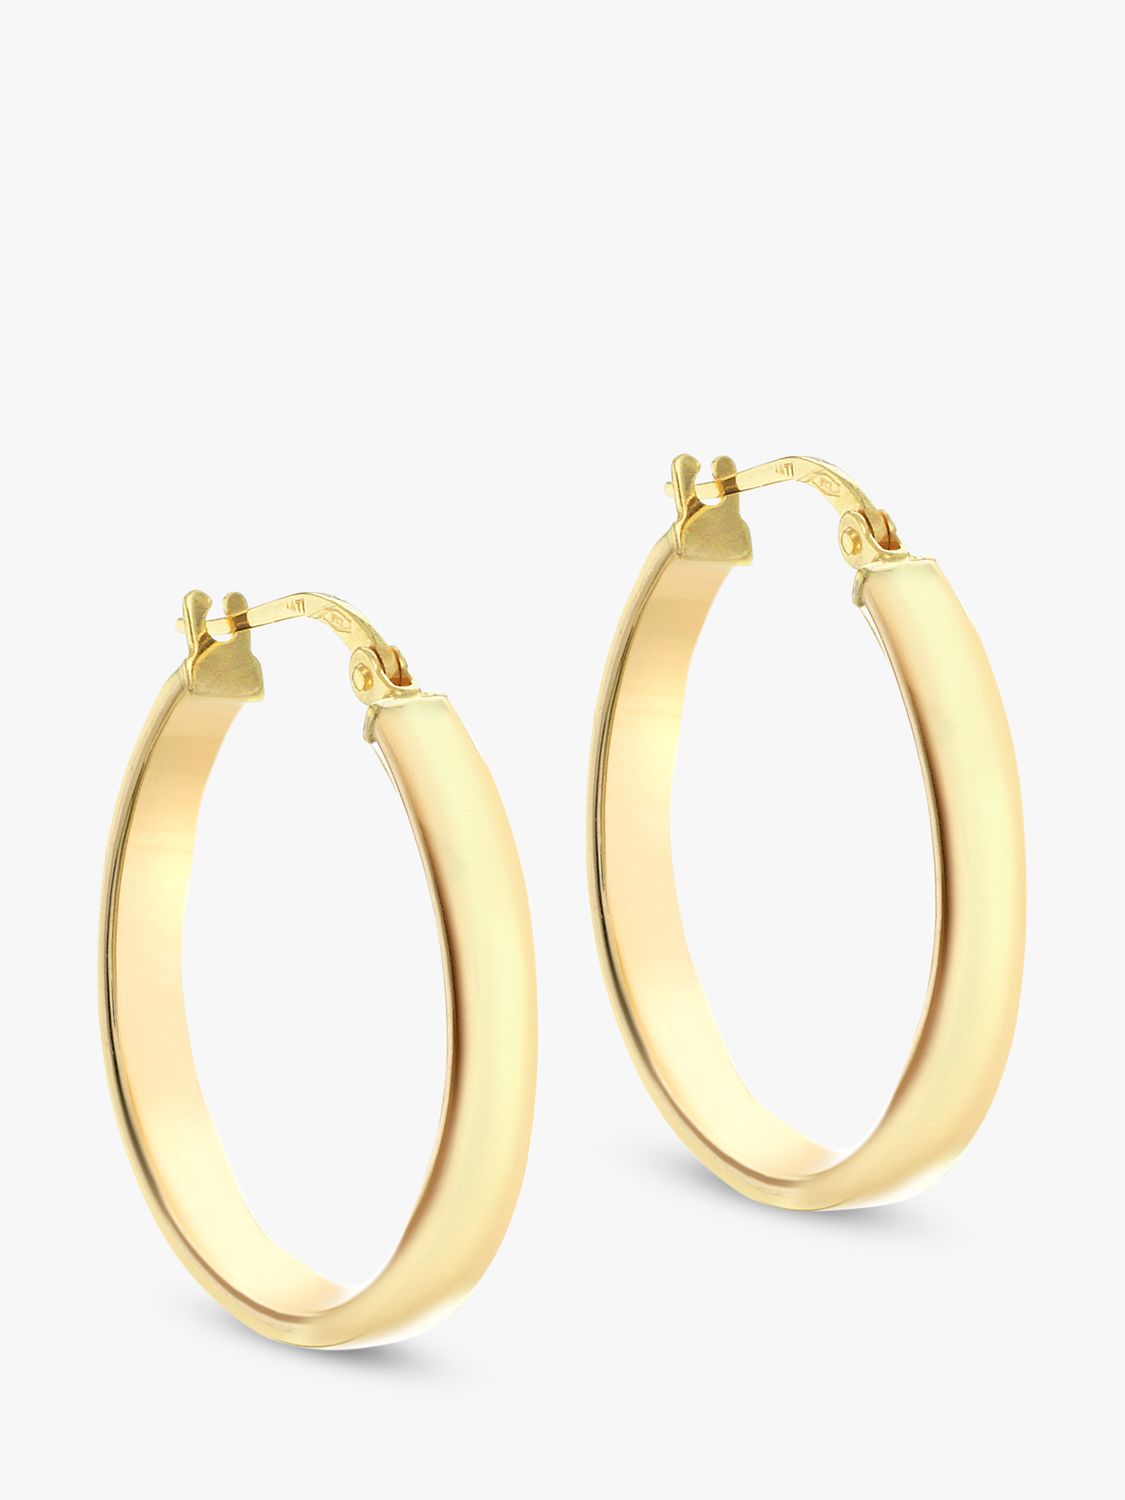 IBB 9ct Yellow Gold Creole Hoop Earrings, Gold at John Lewis & Partners